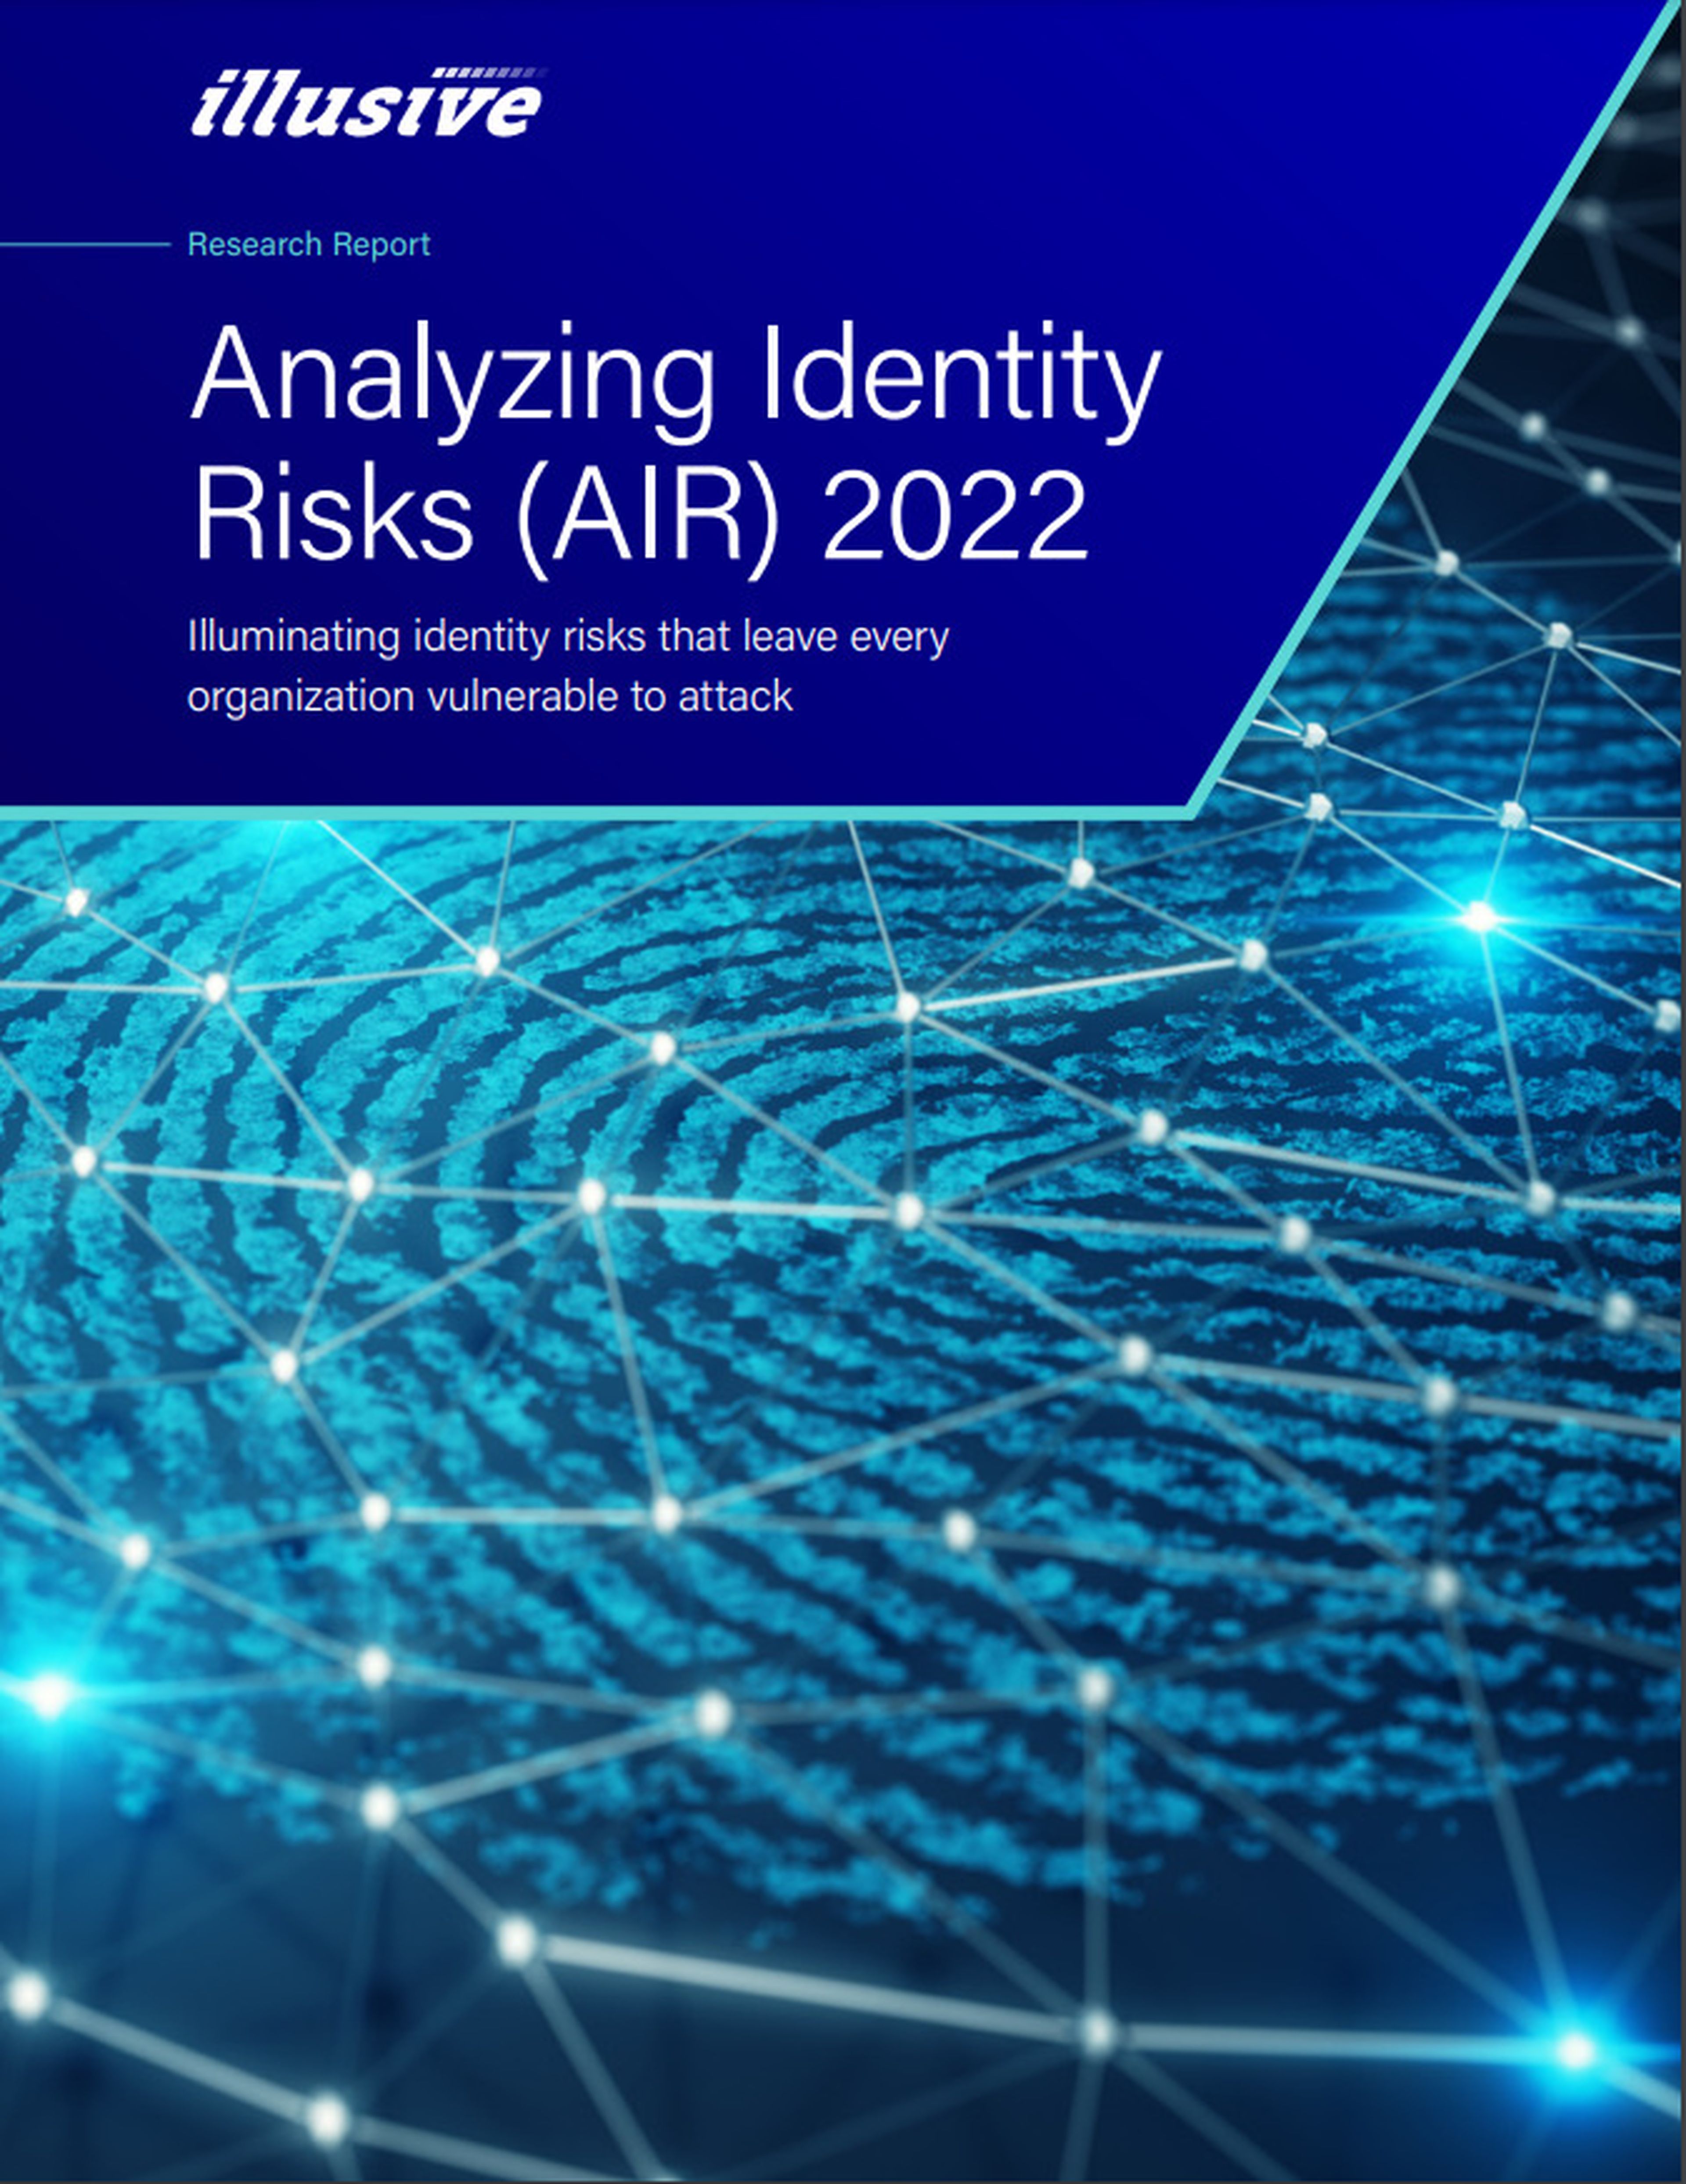 Analyzing Identity Risks (AIR) Research Report